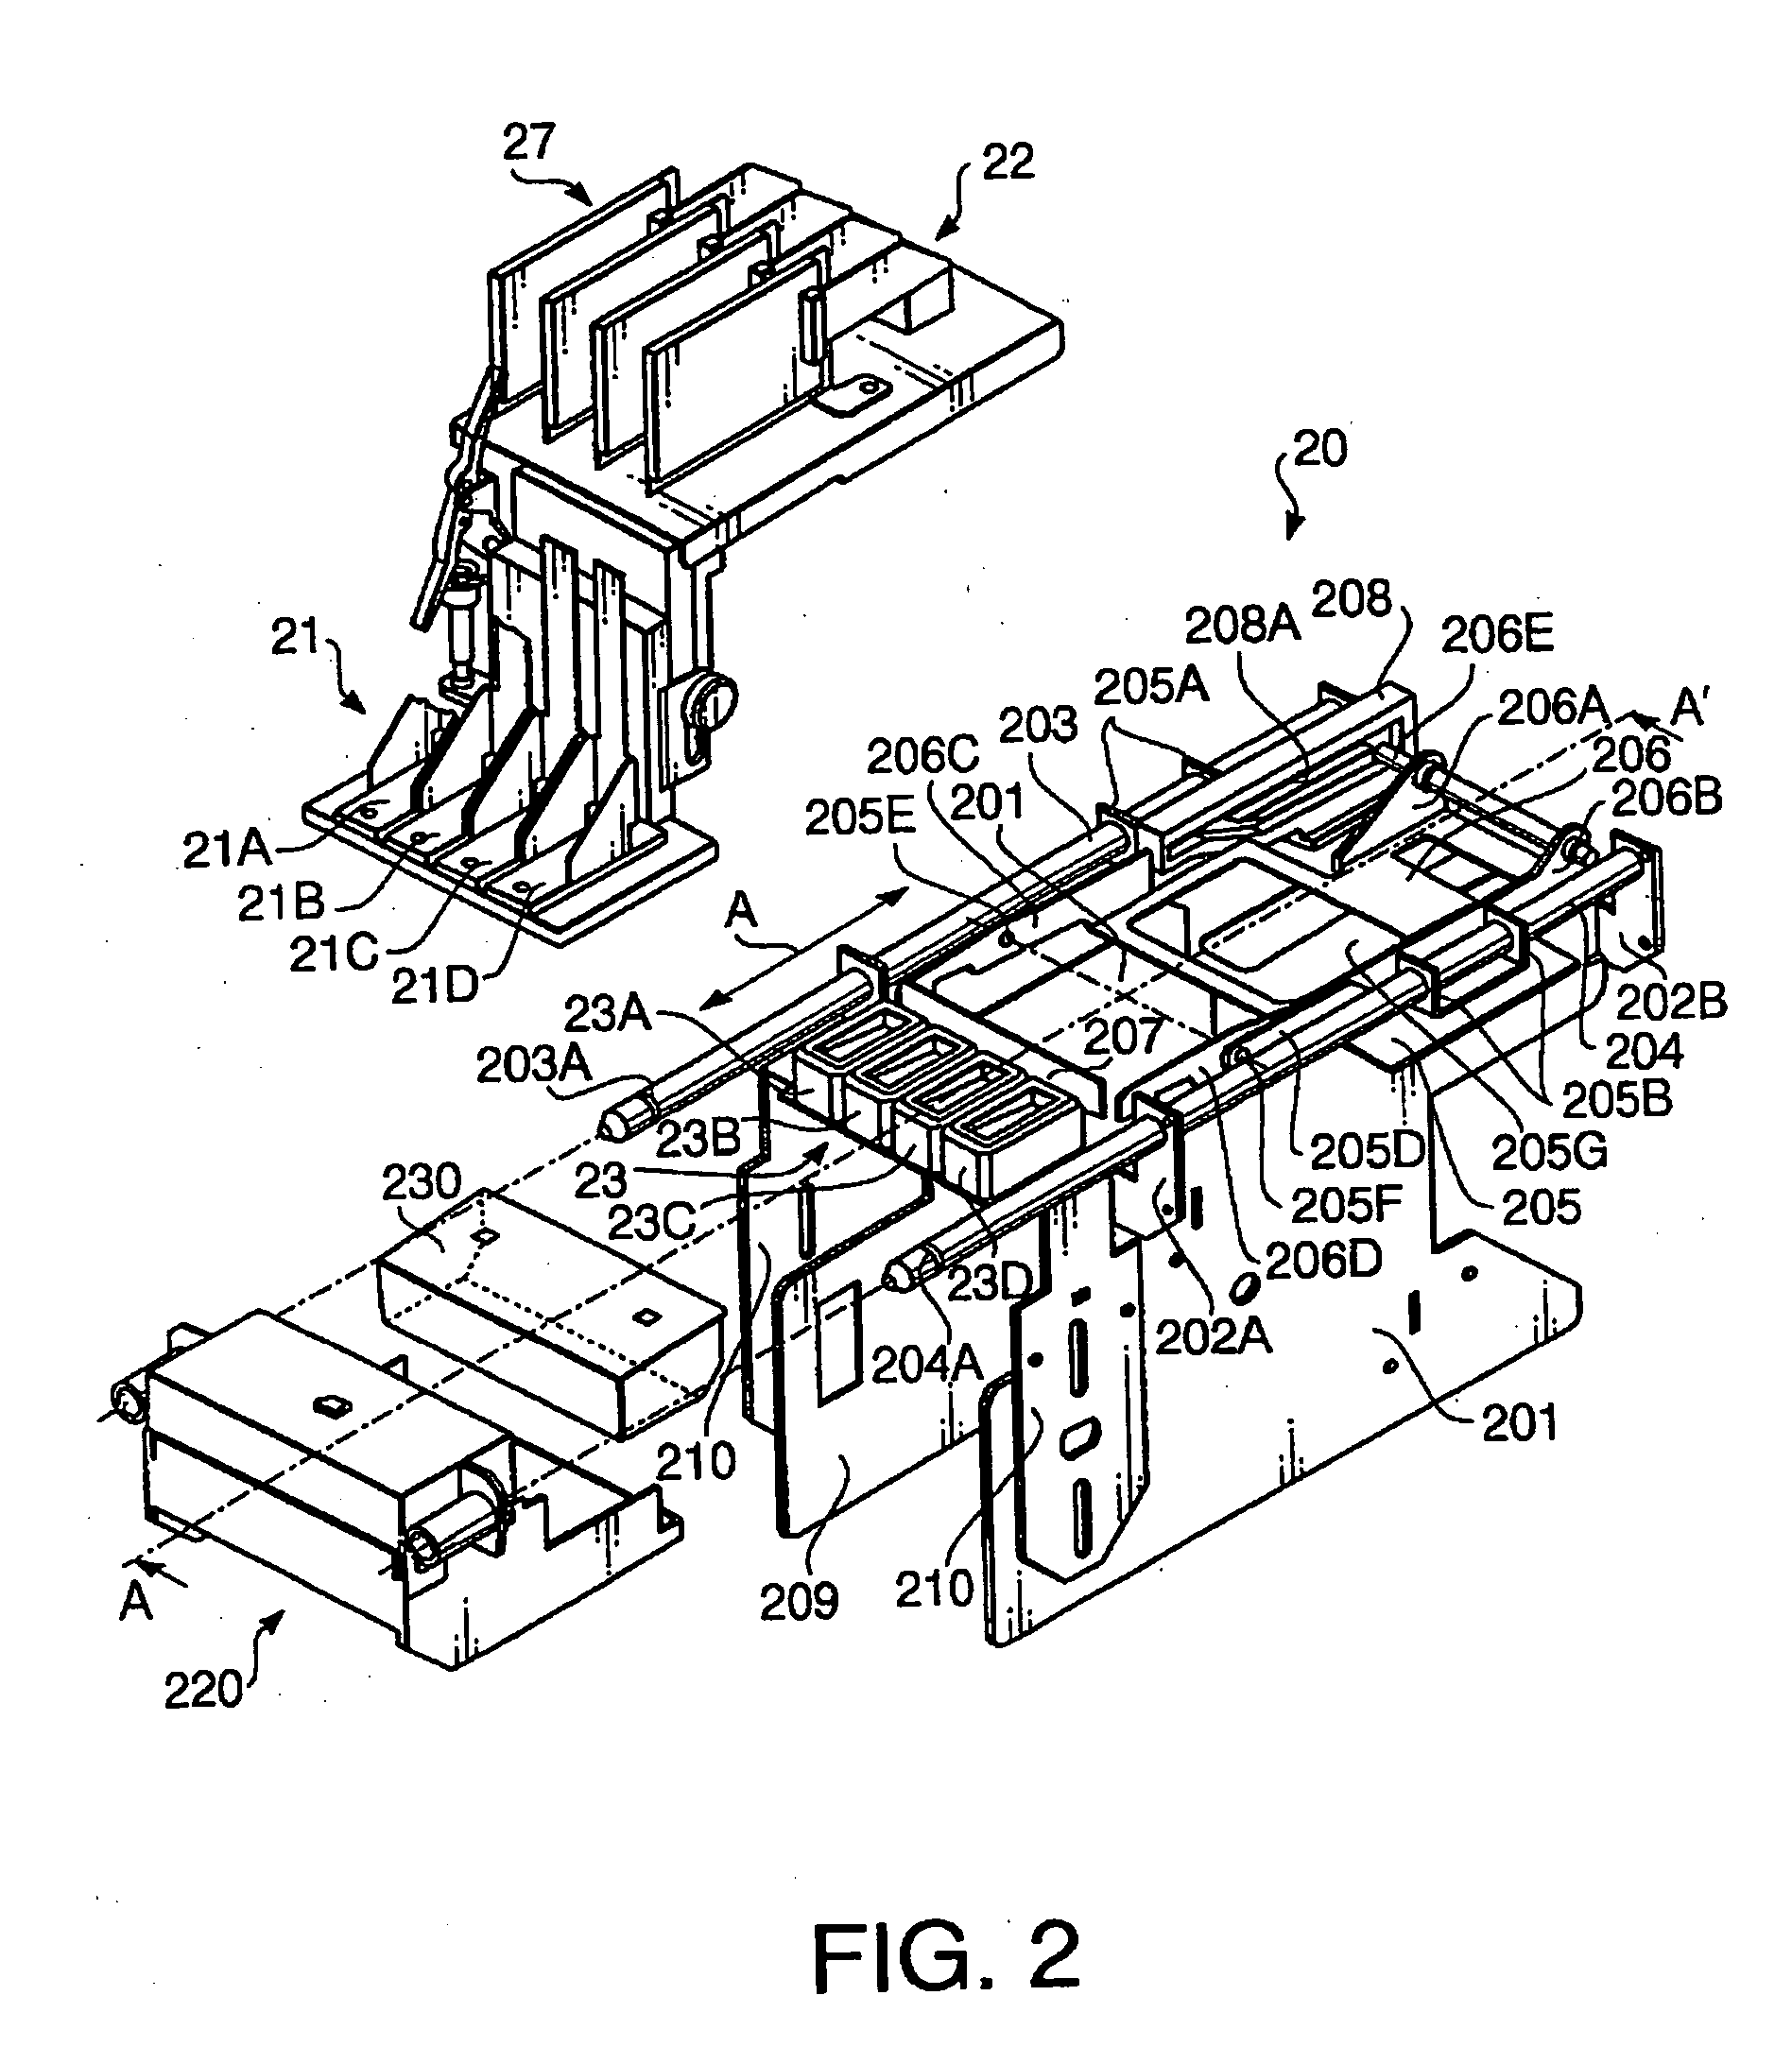 Inkjet printing device, method and computer program product for controlling ejection restoring system